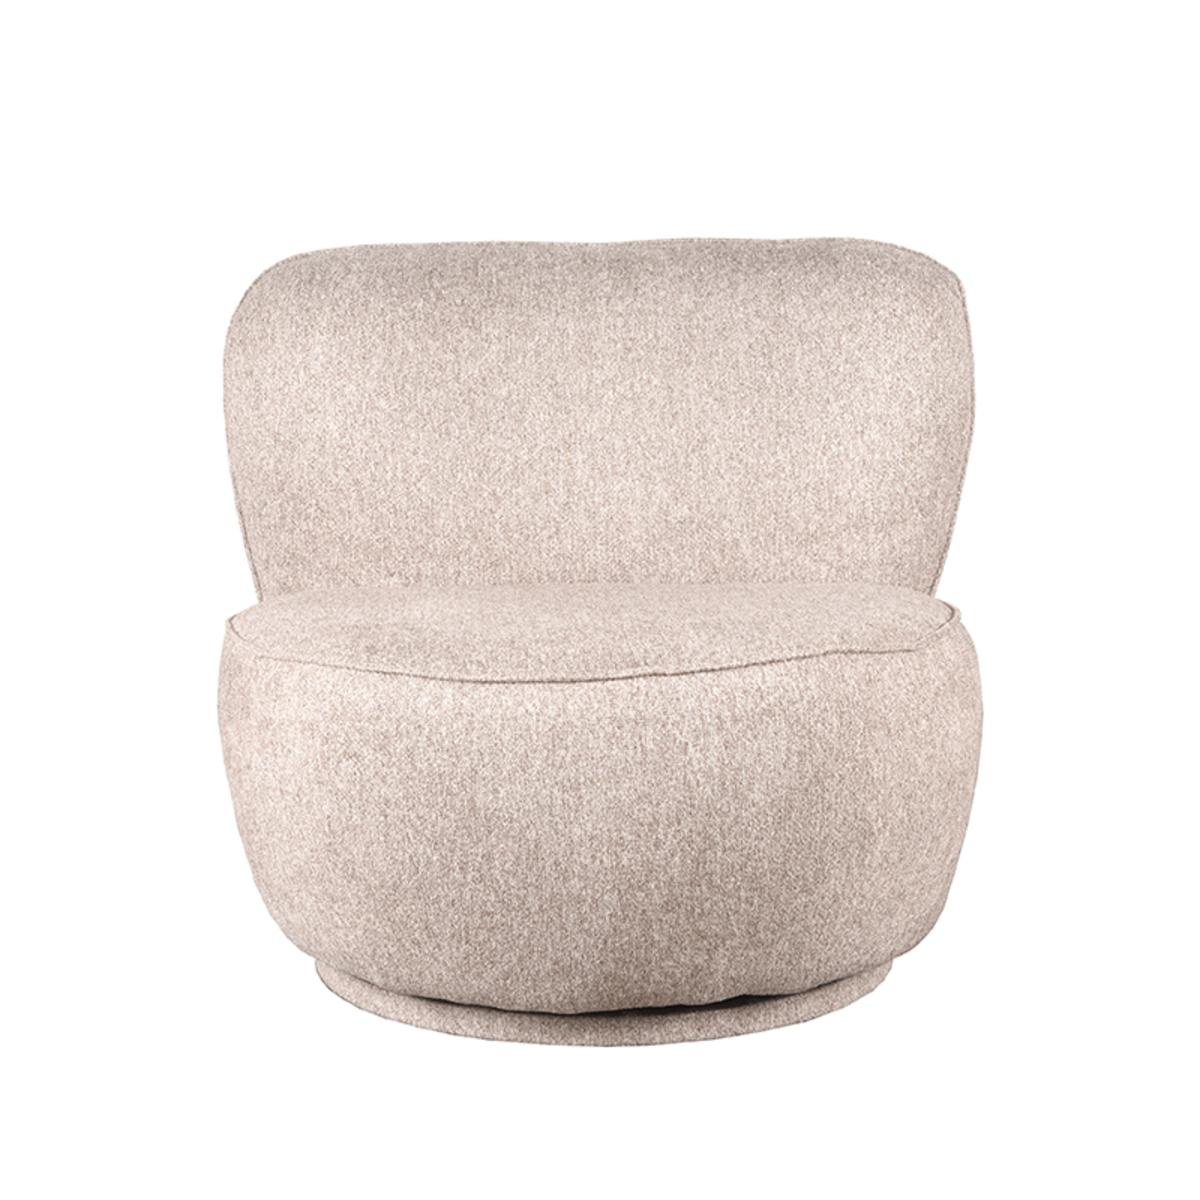  Fauteuil Bunny - Taupe - Amazy afbeelding 2